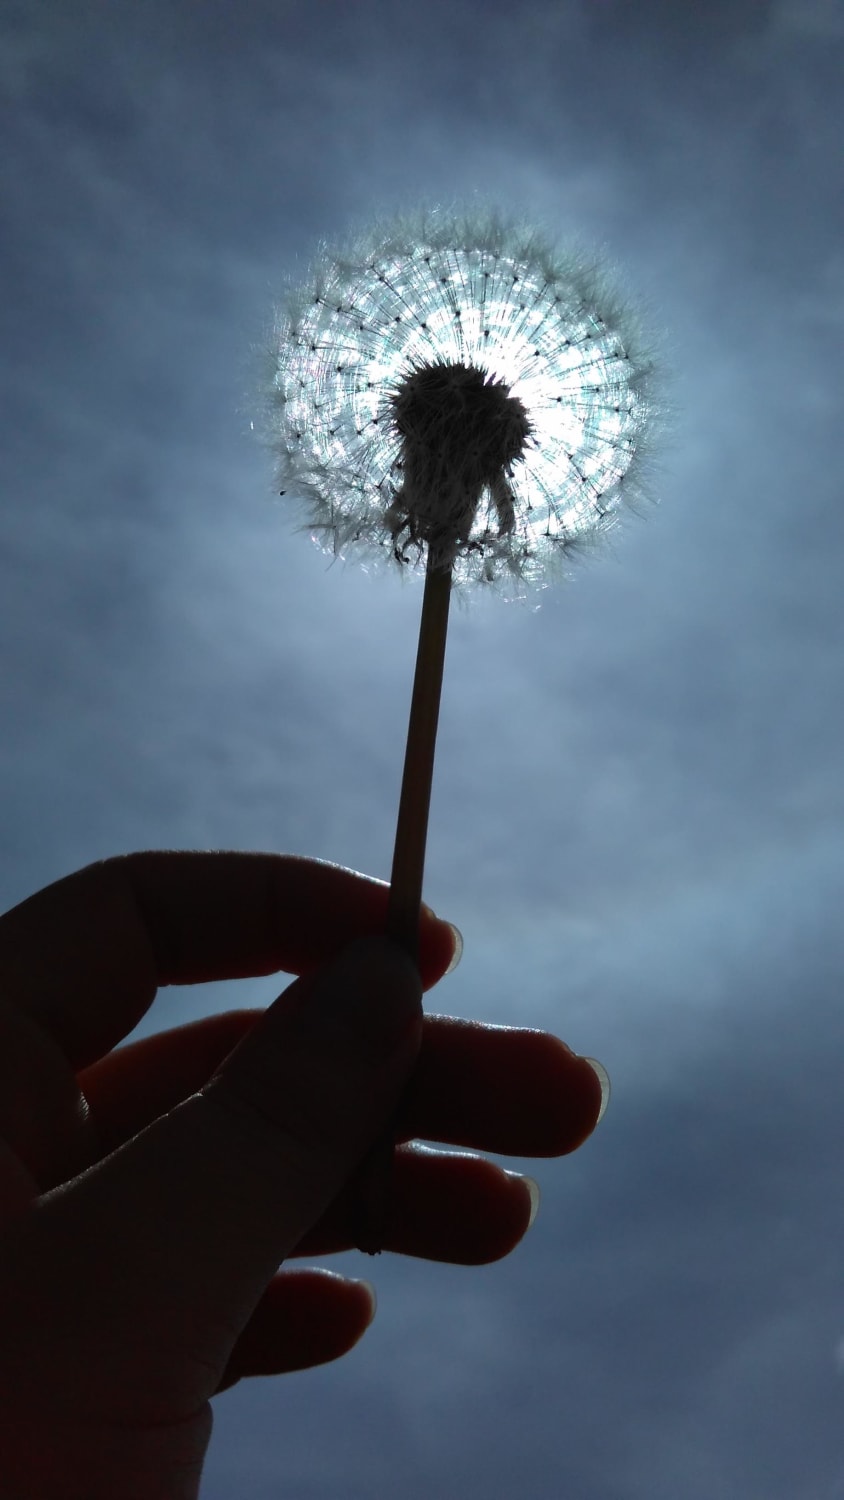 Also wanted to share my photo of a dandelion :)